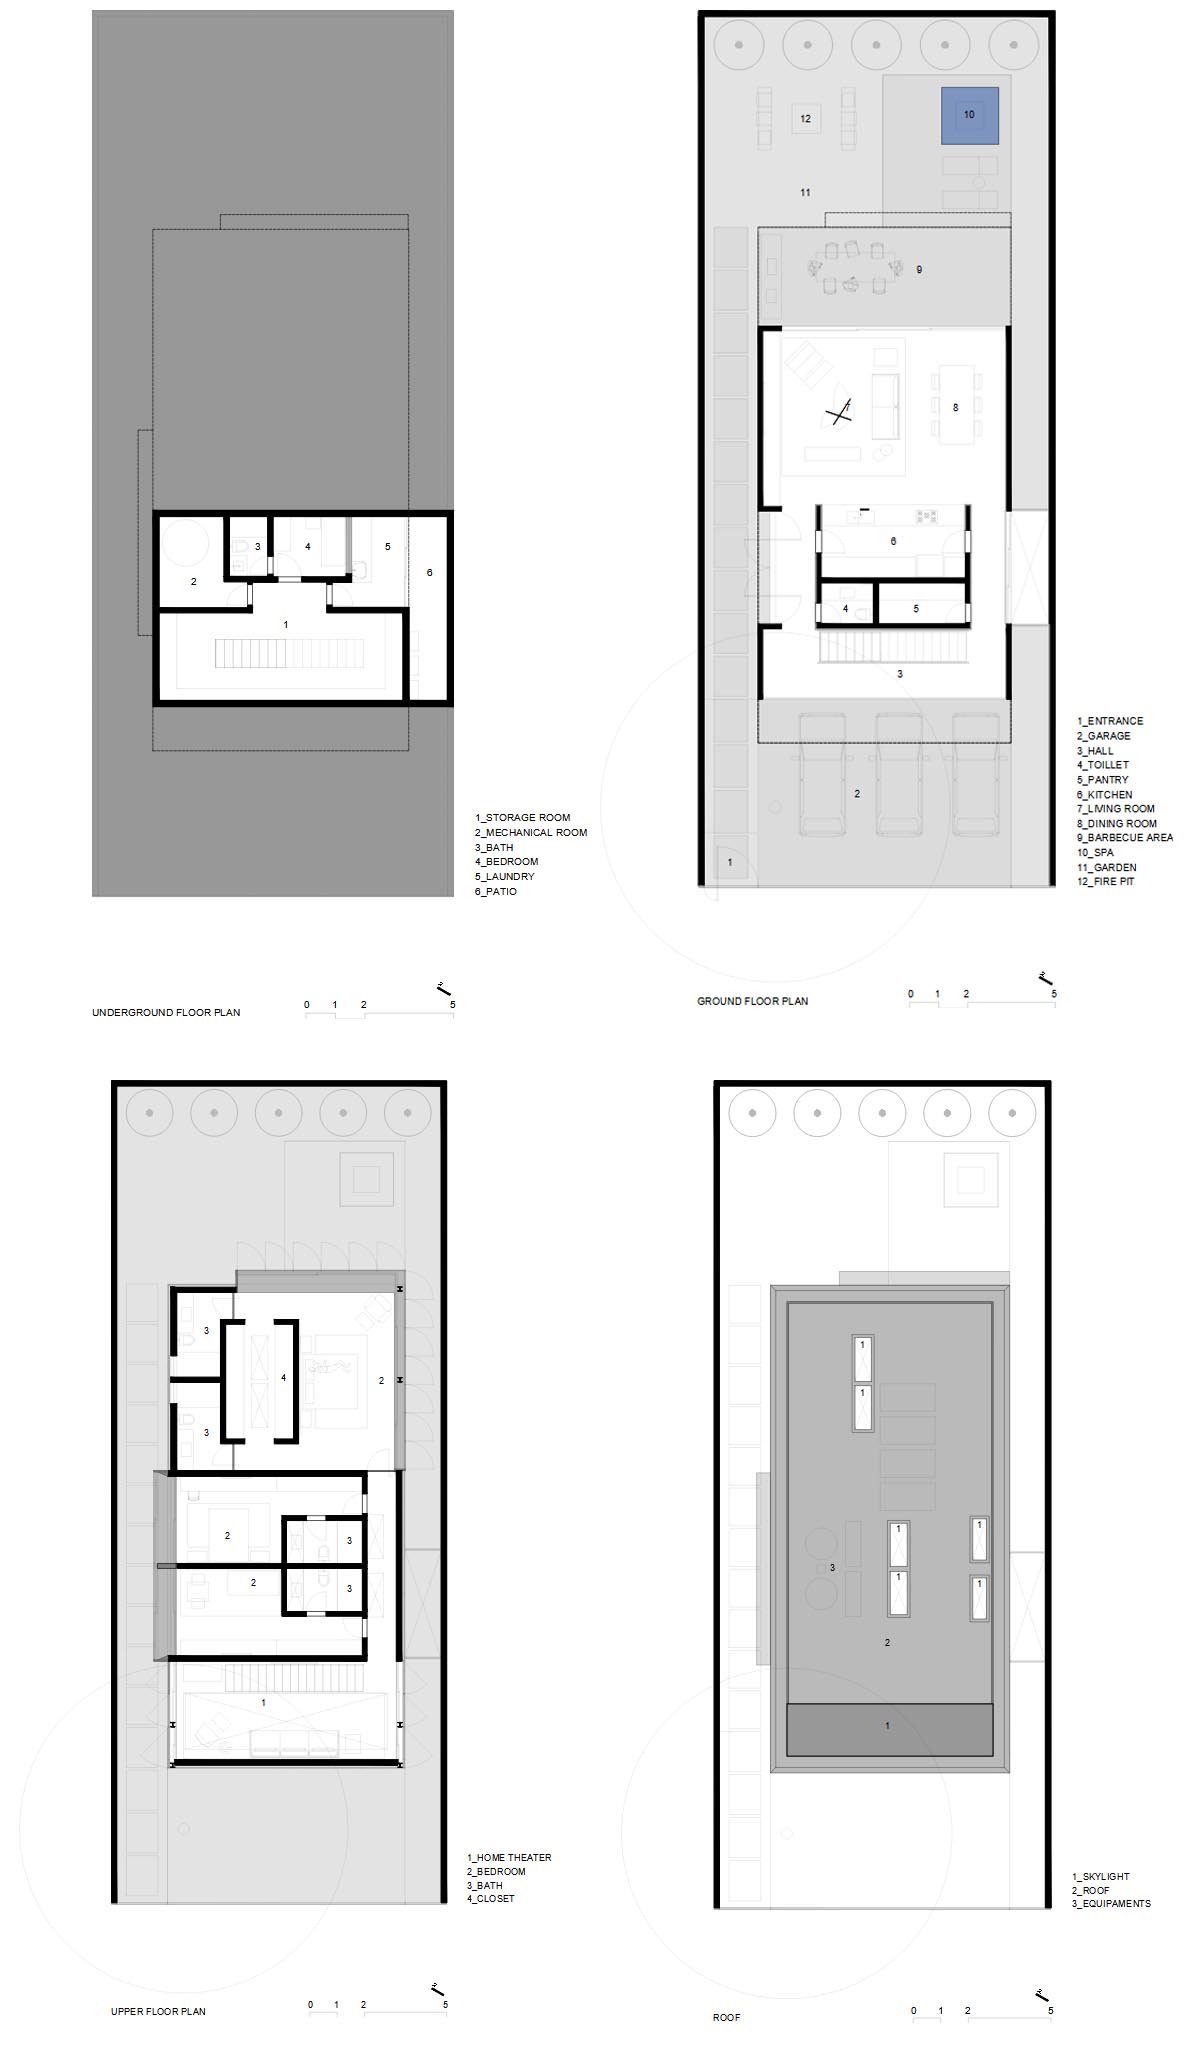 The floor plan of a multi-level house.